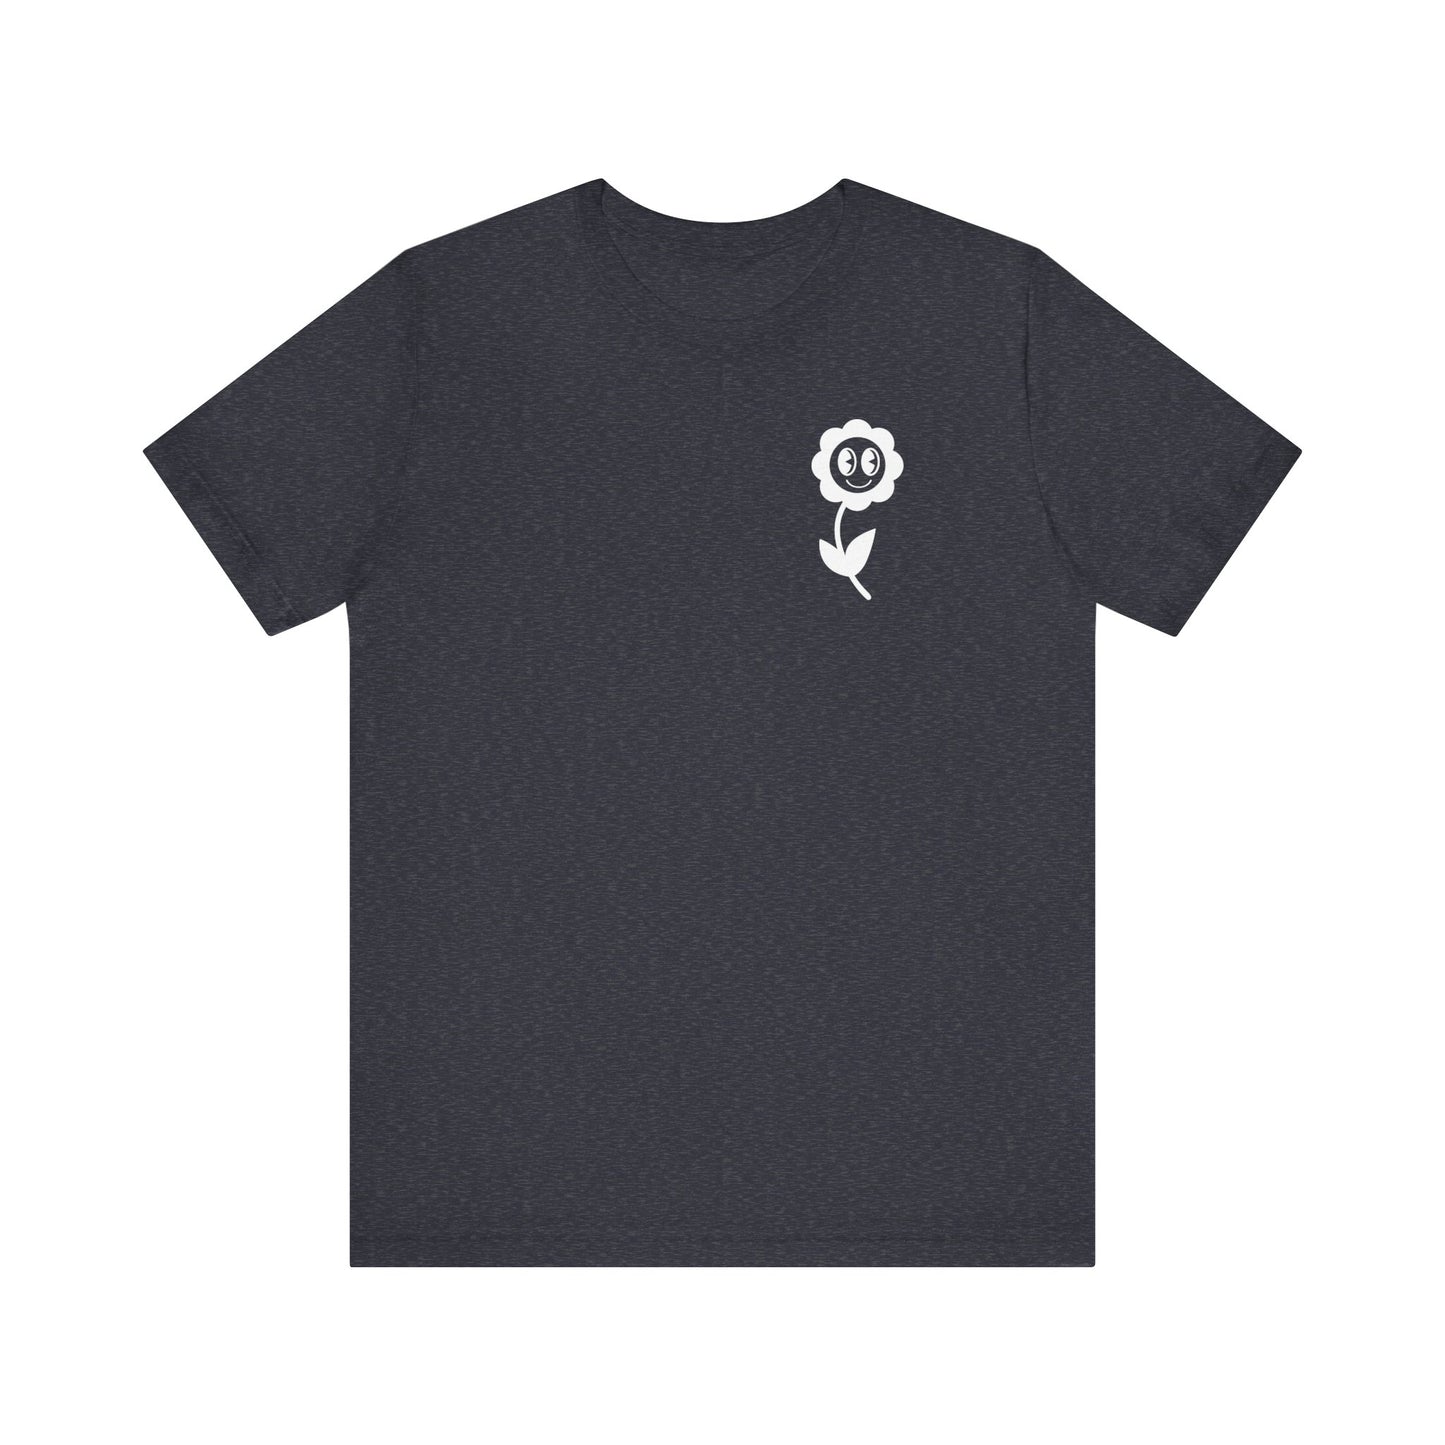 Bloom Where You're Planted Tee - Navy/Black/Kelly Green